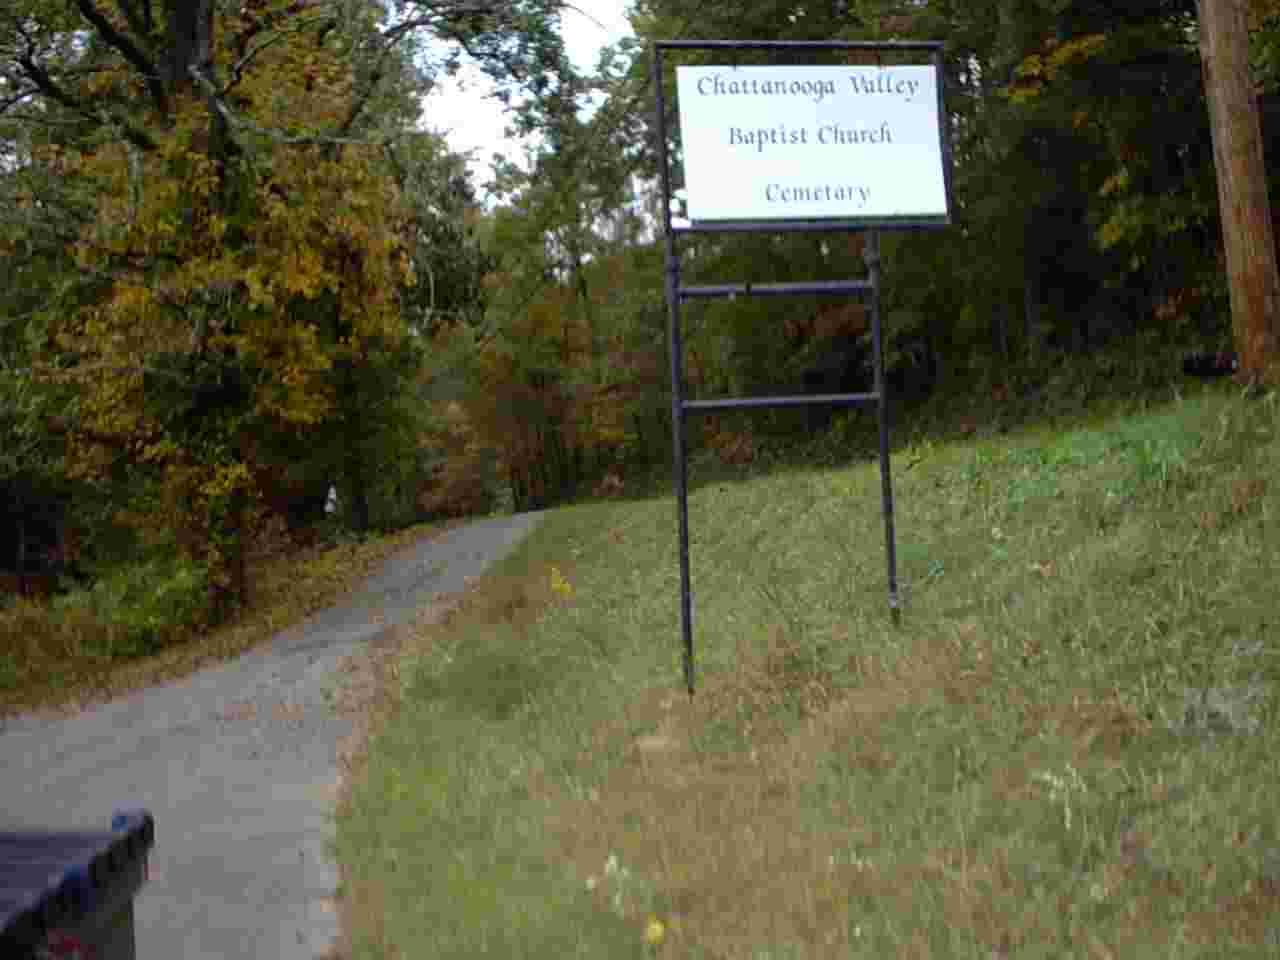 Chattanooga Valley Baptist Church Cemetery sign at the entrance to the forest